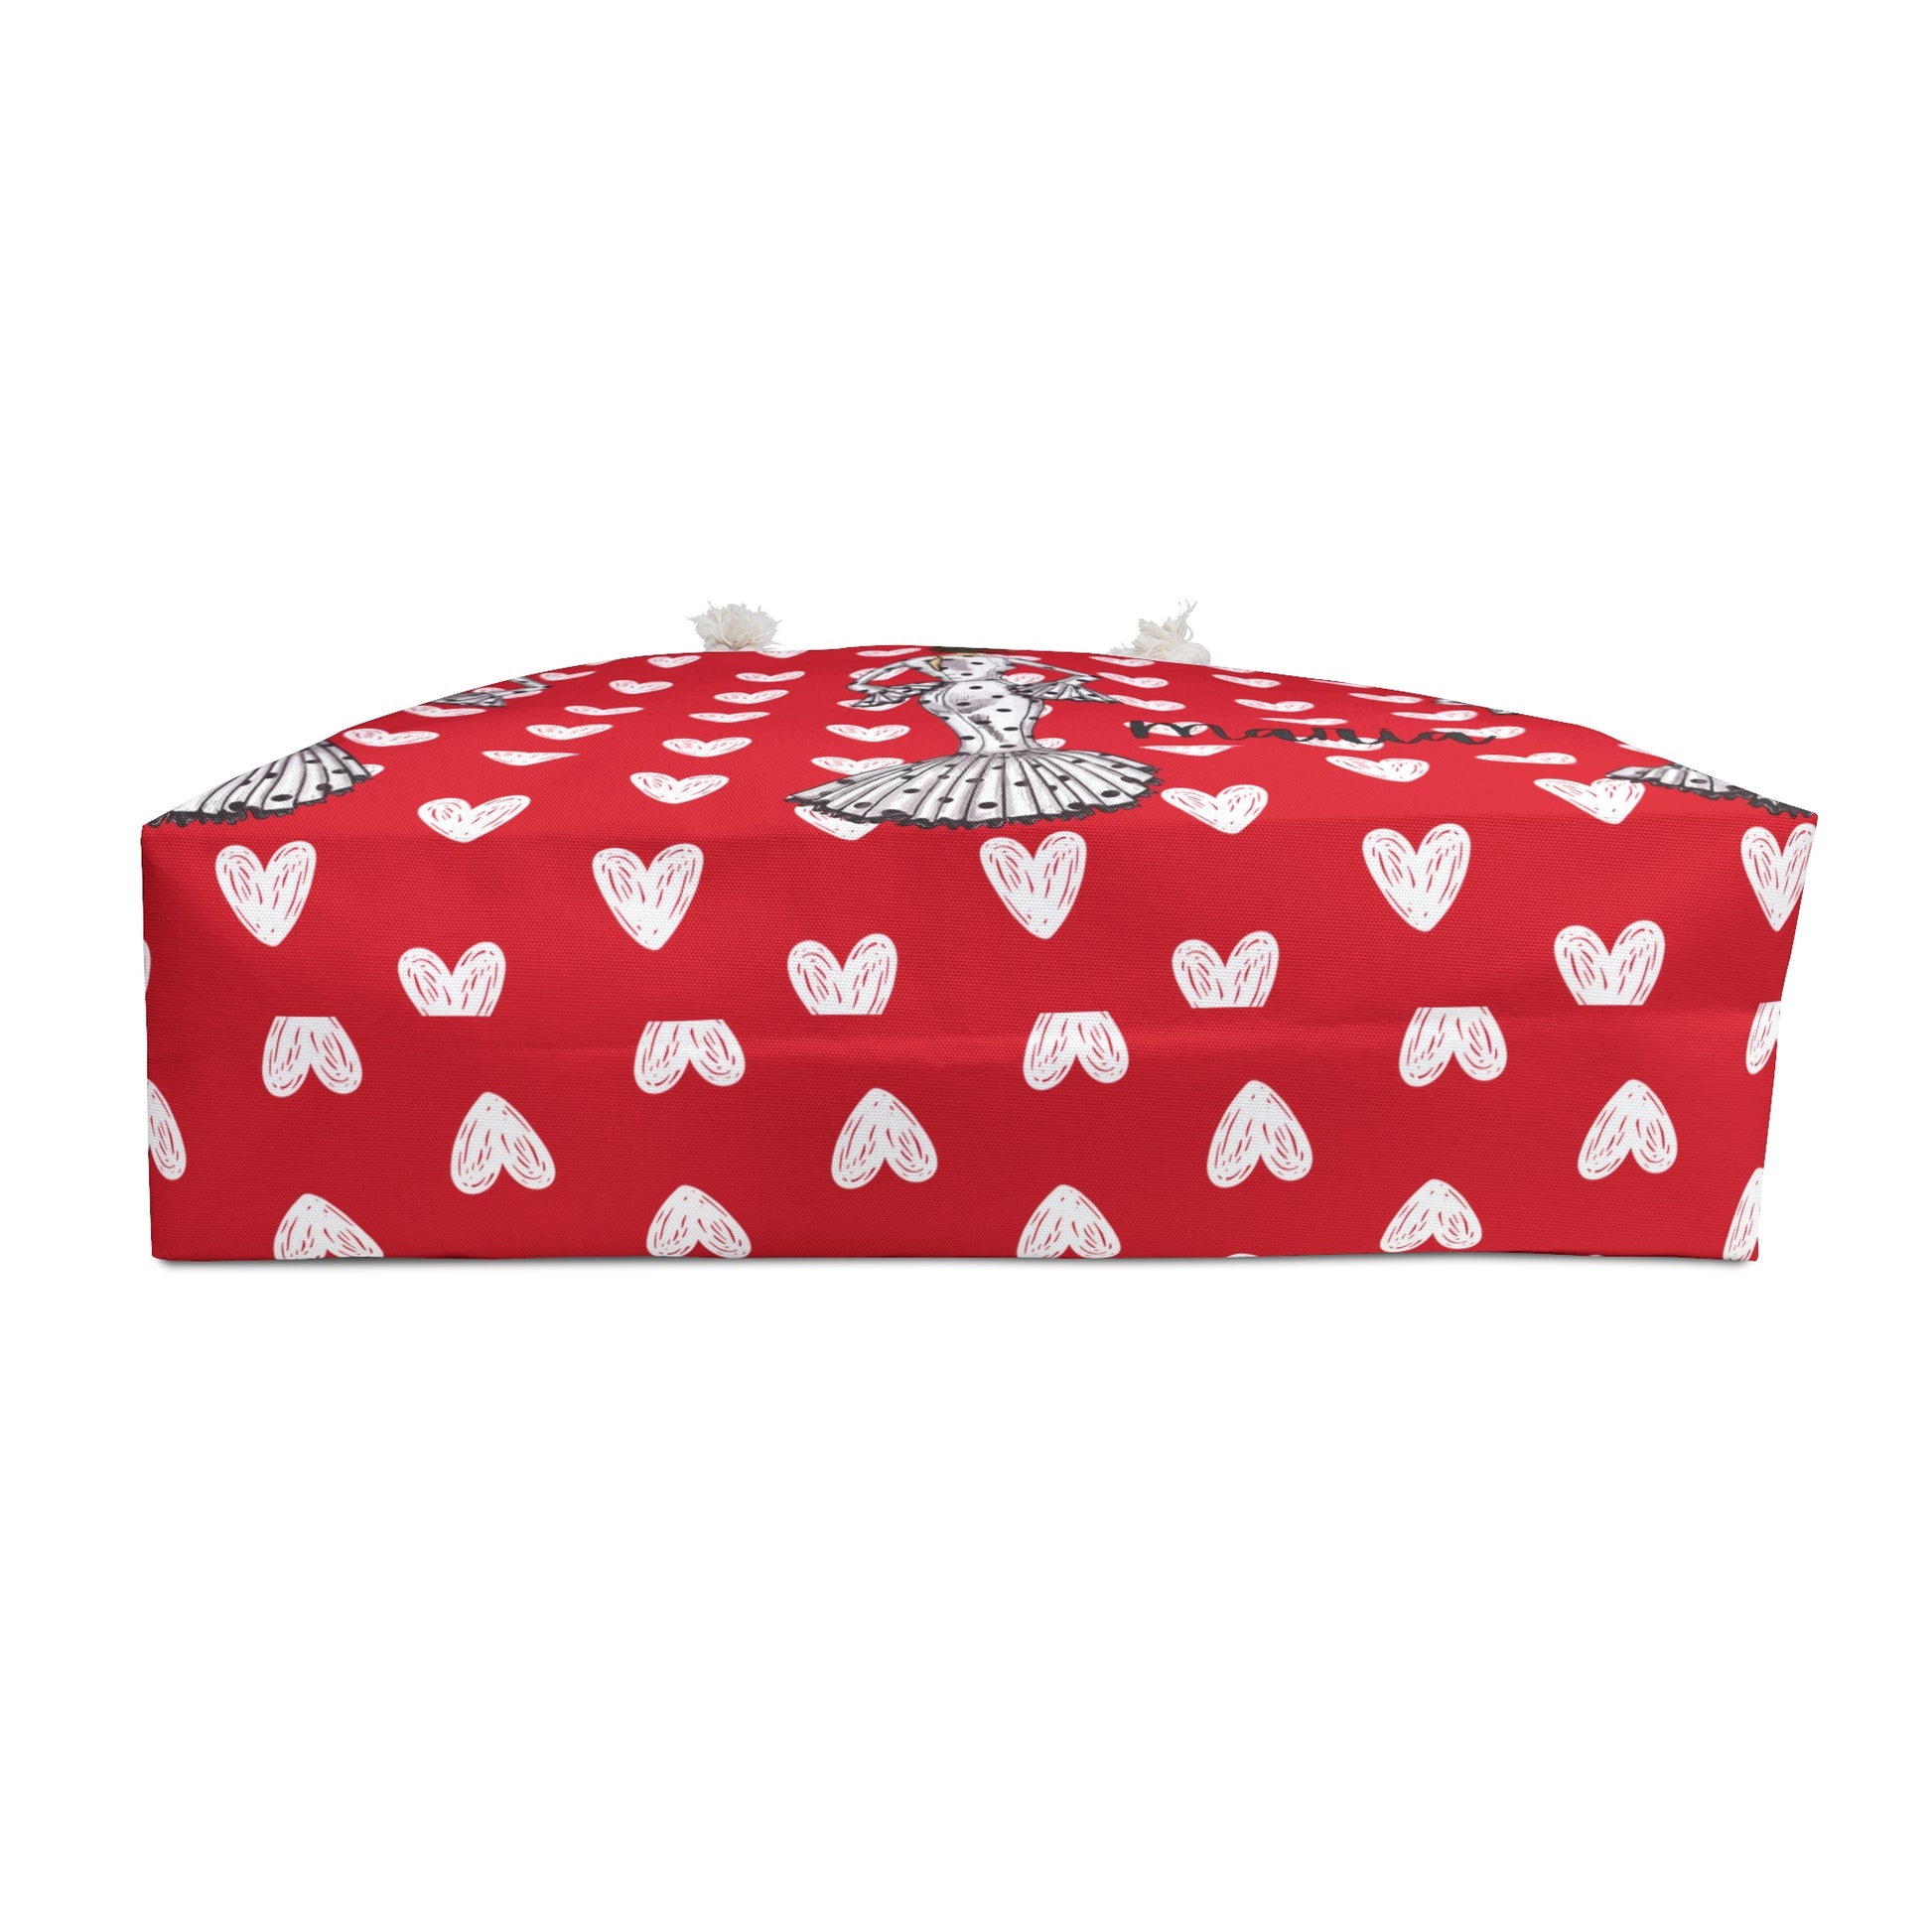 a red box with white hearts on it